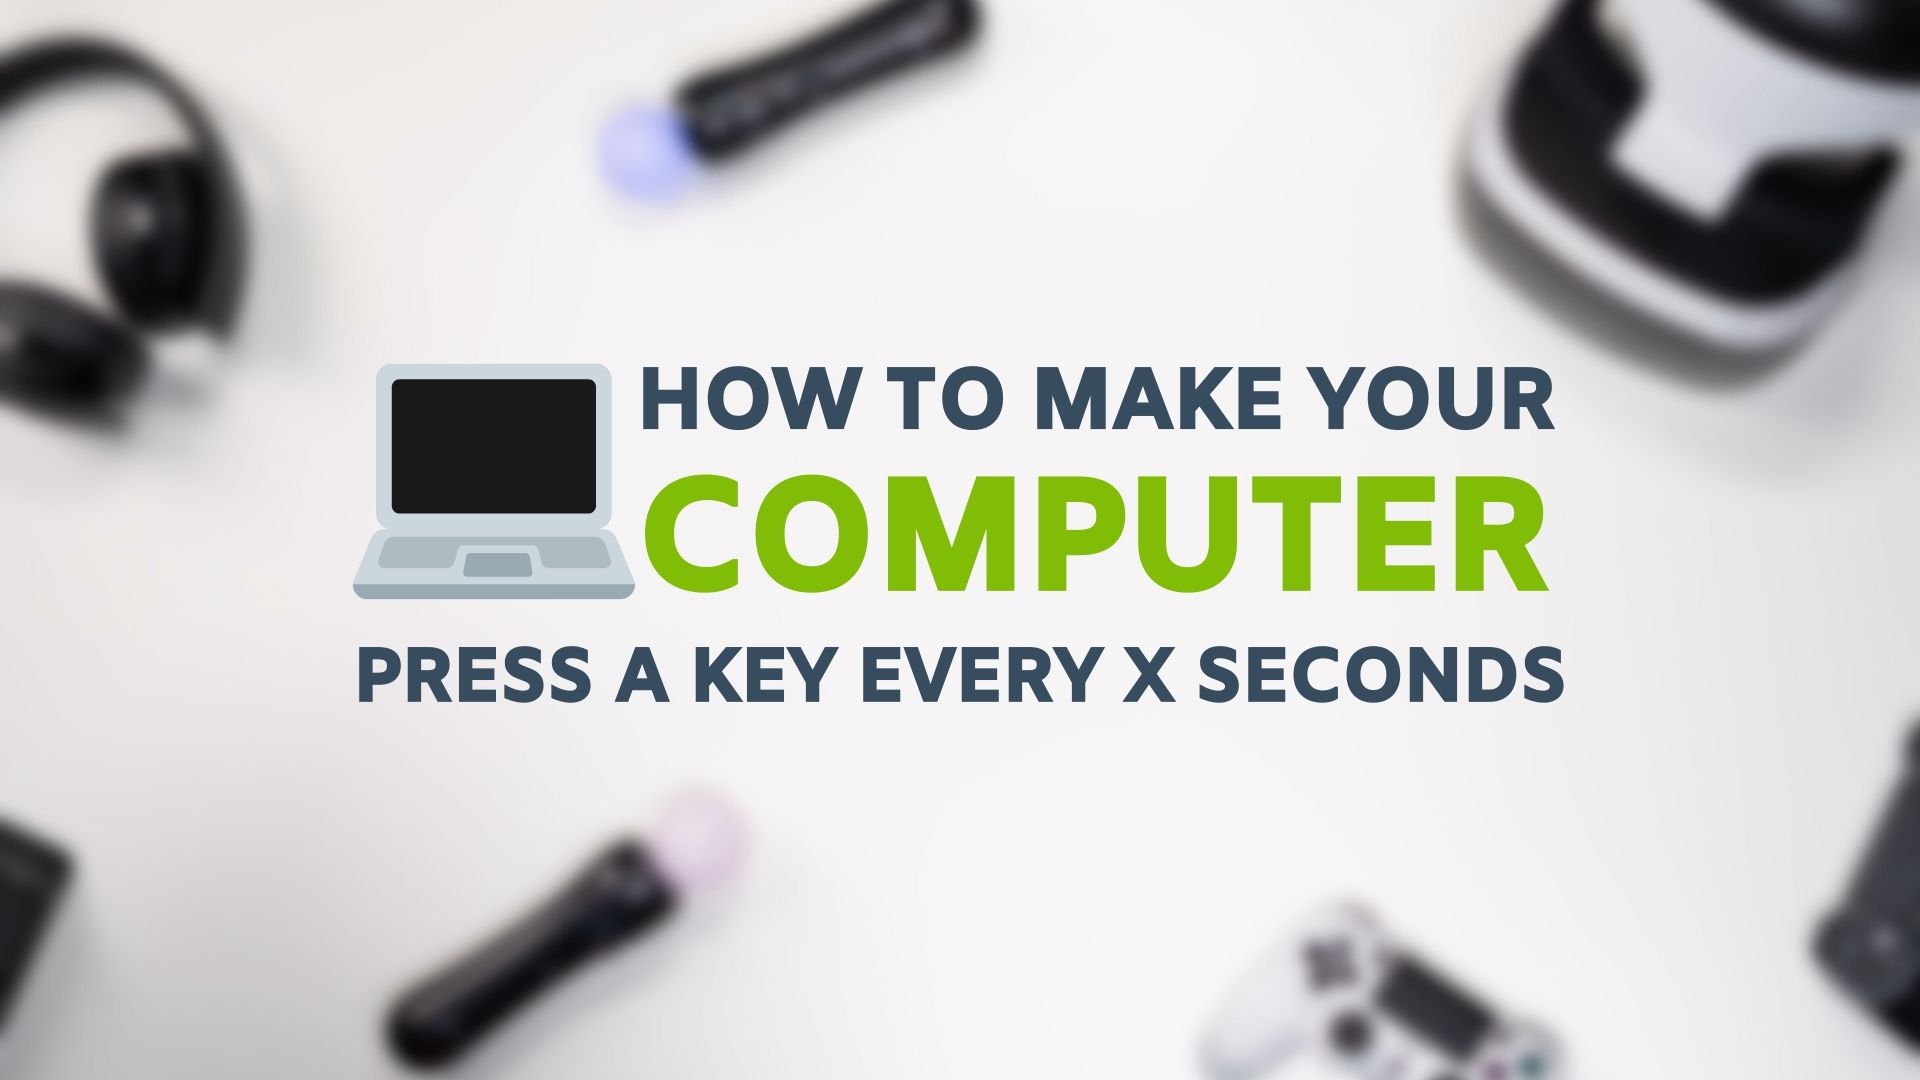 How To Make Your Computer Press A Key Every X Seconds